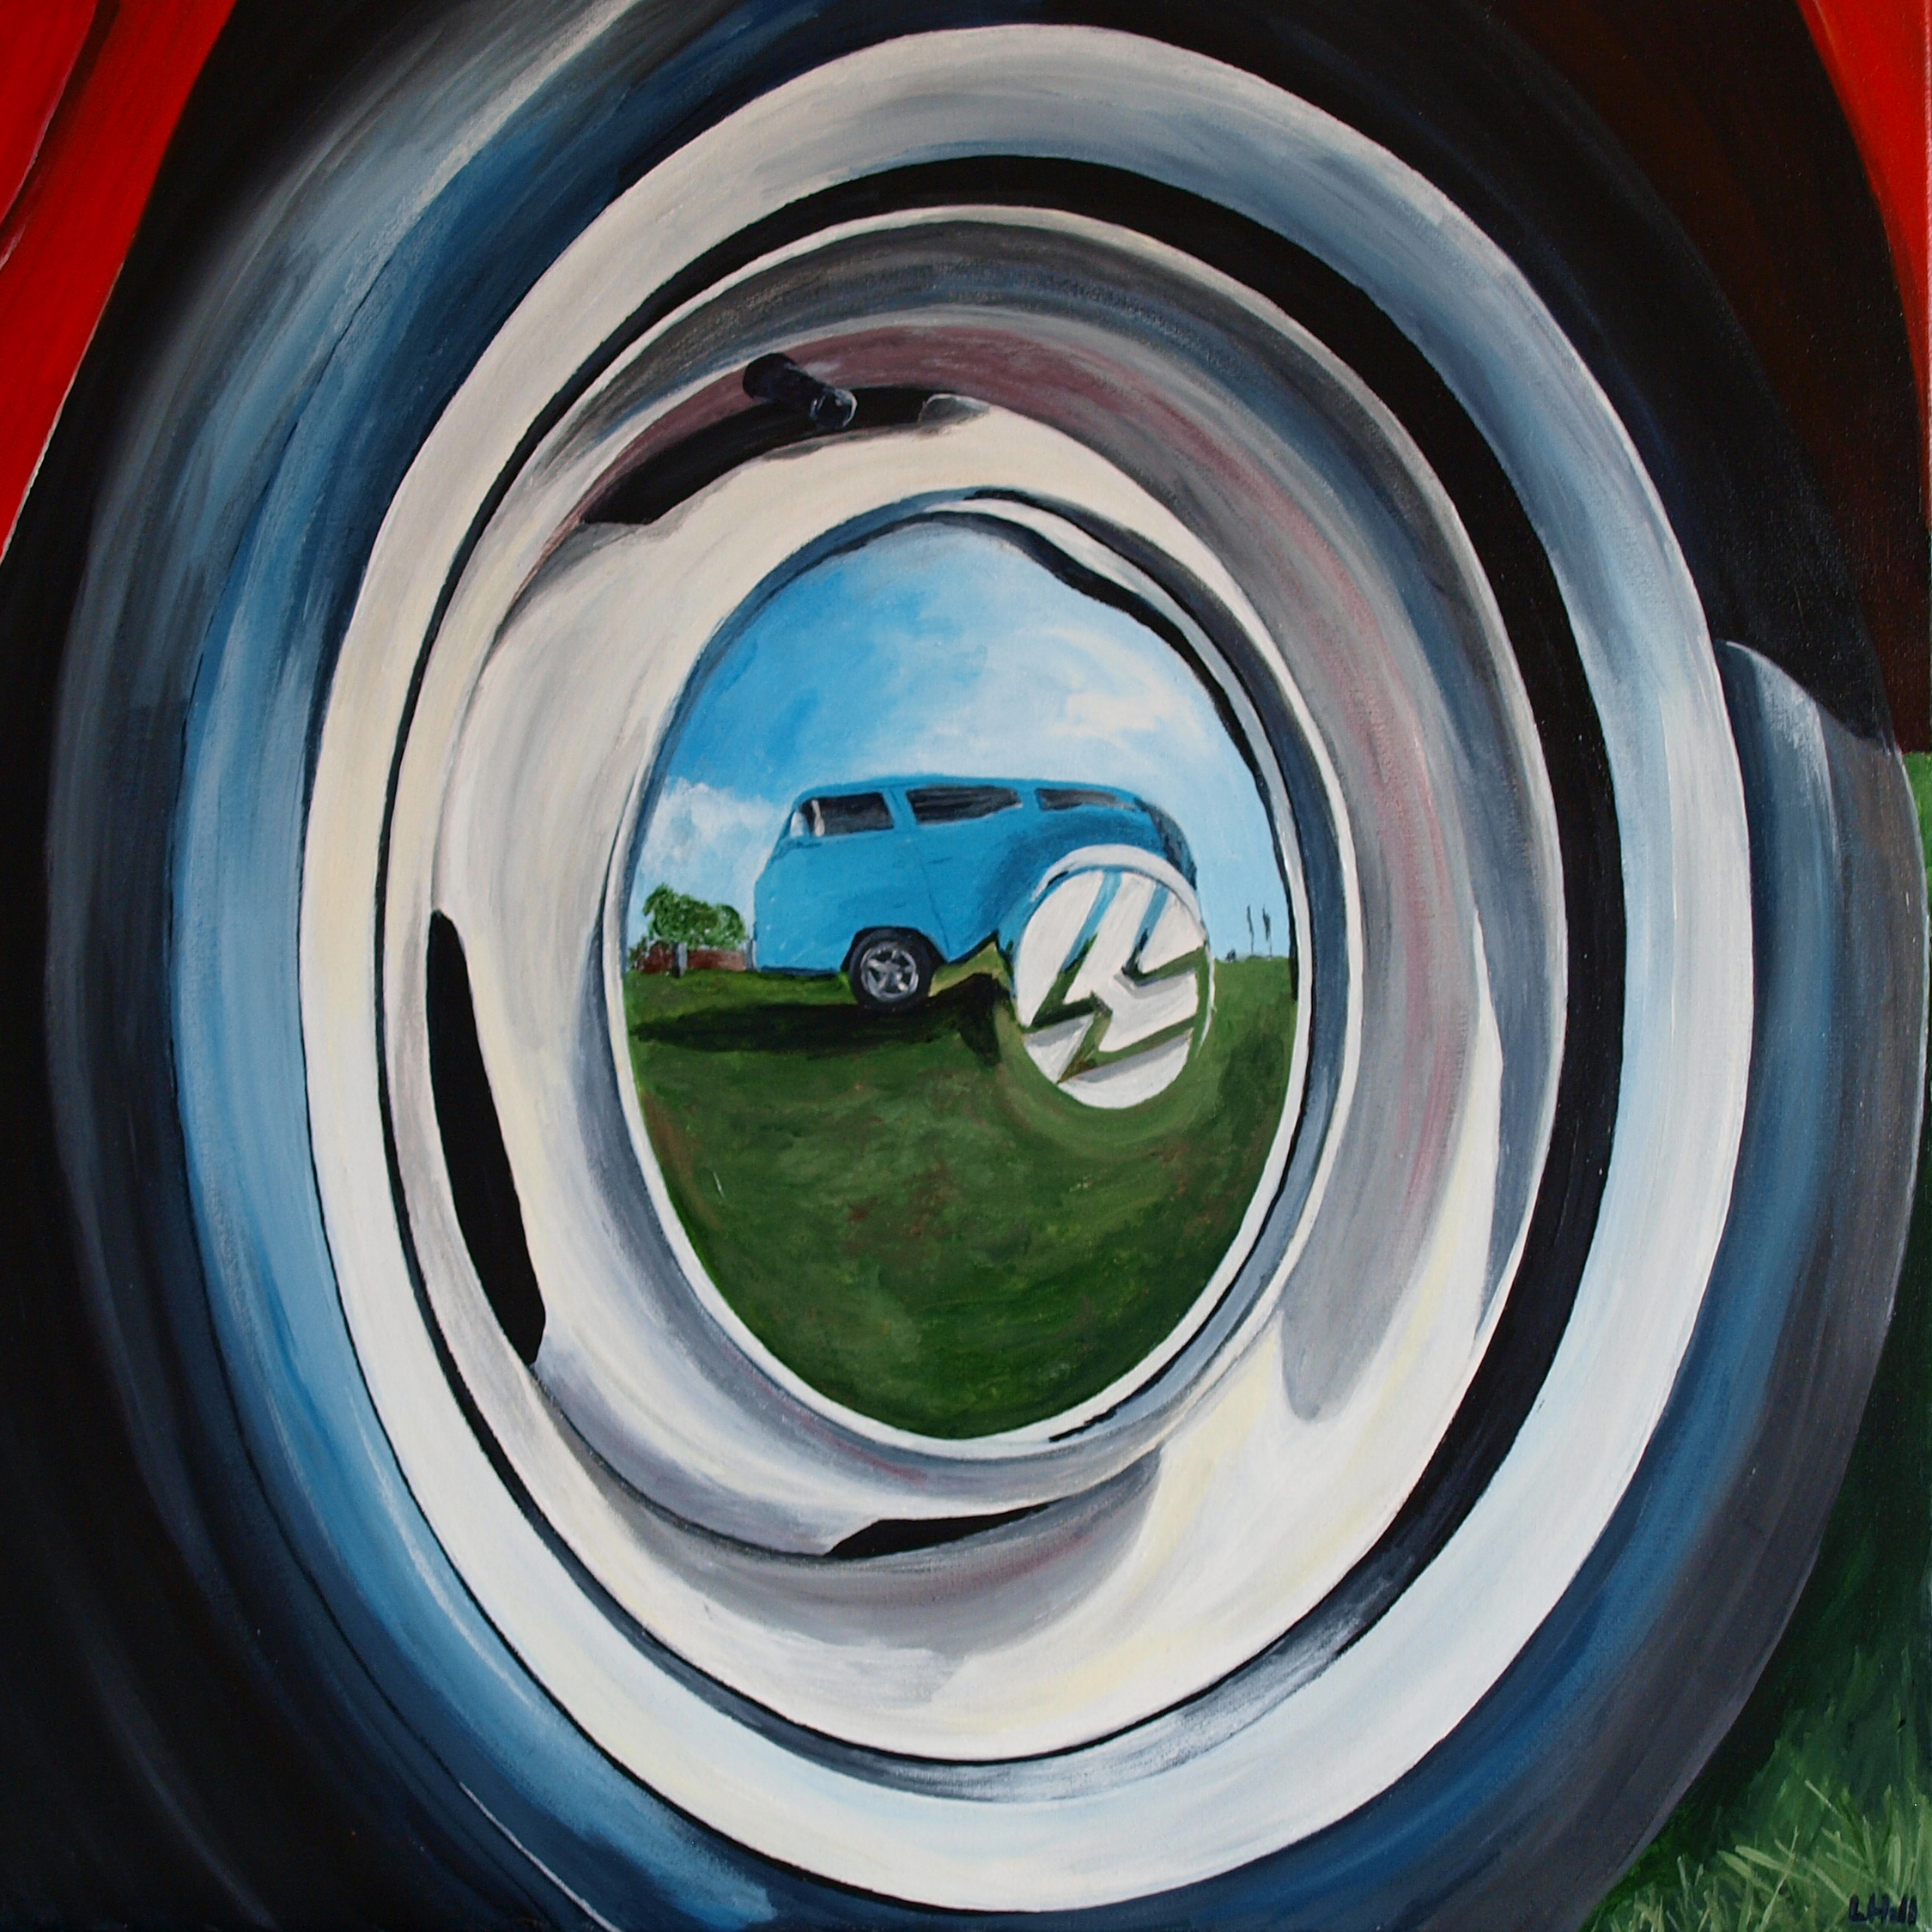 Reflection of a VW Campervan acrylic painting by Louisa Hill